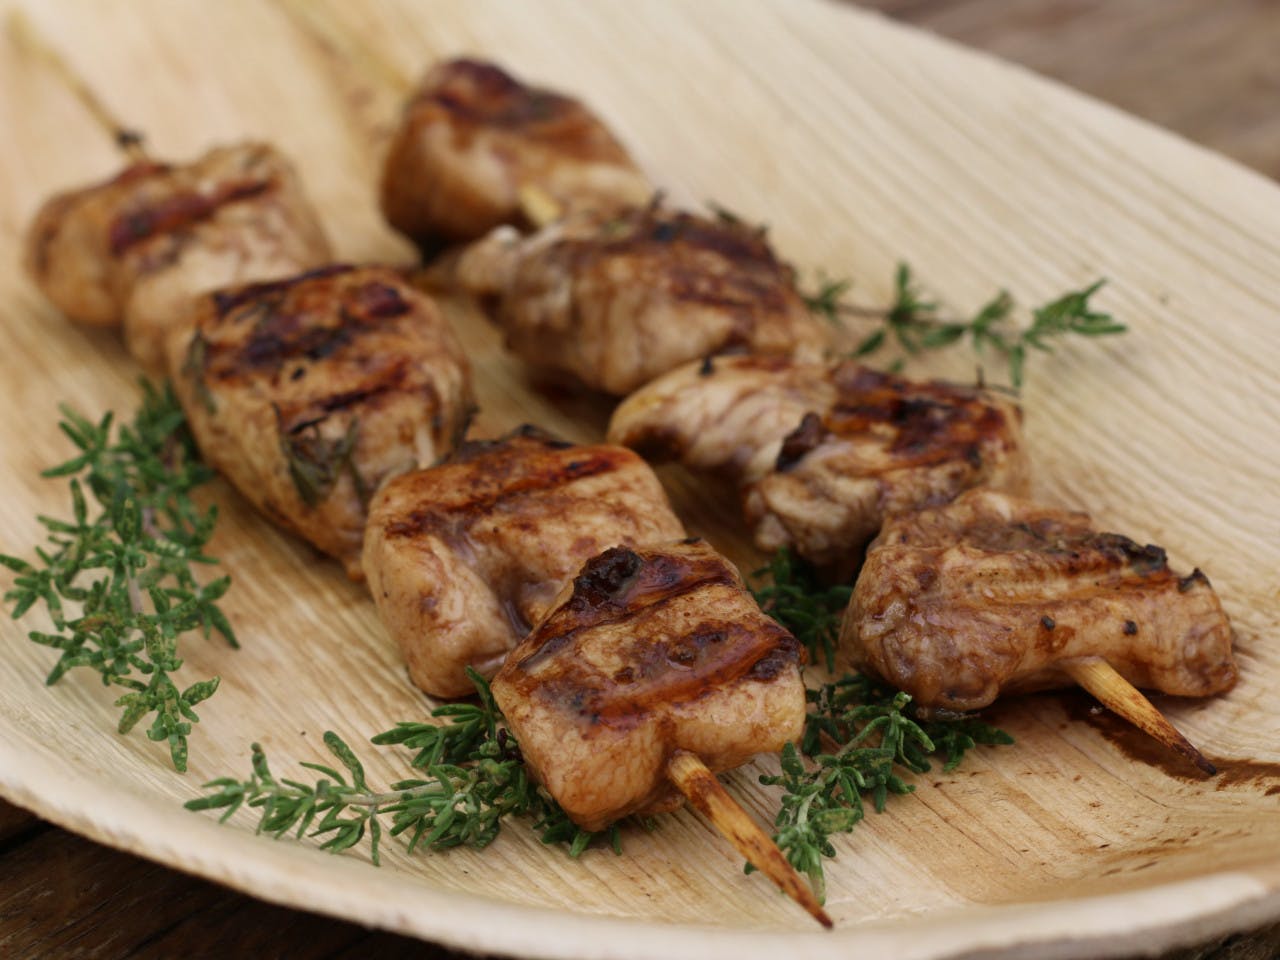 Chicken skewer with balsamic vinegar and thyme